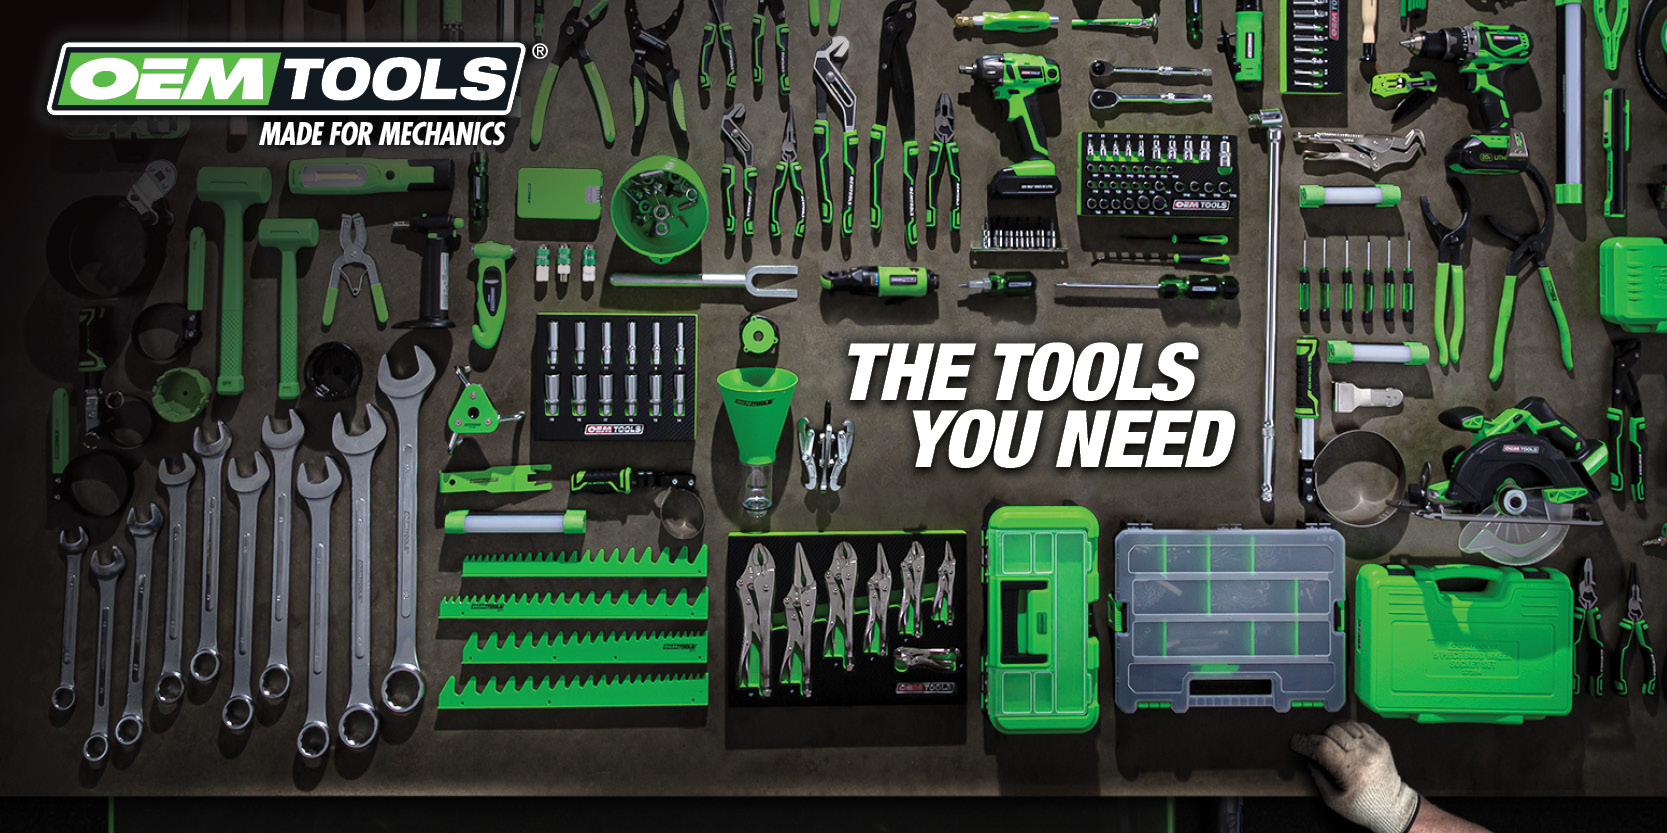 OEMTOOLS The Tools You Need